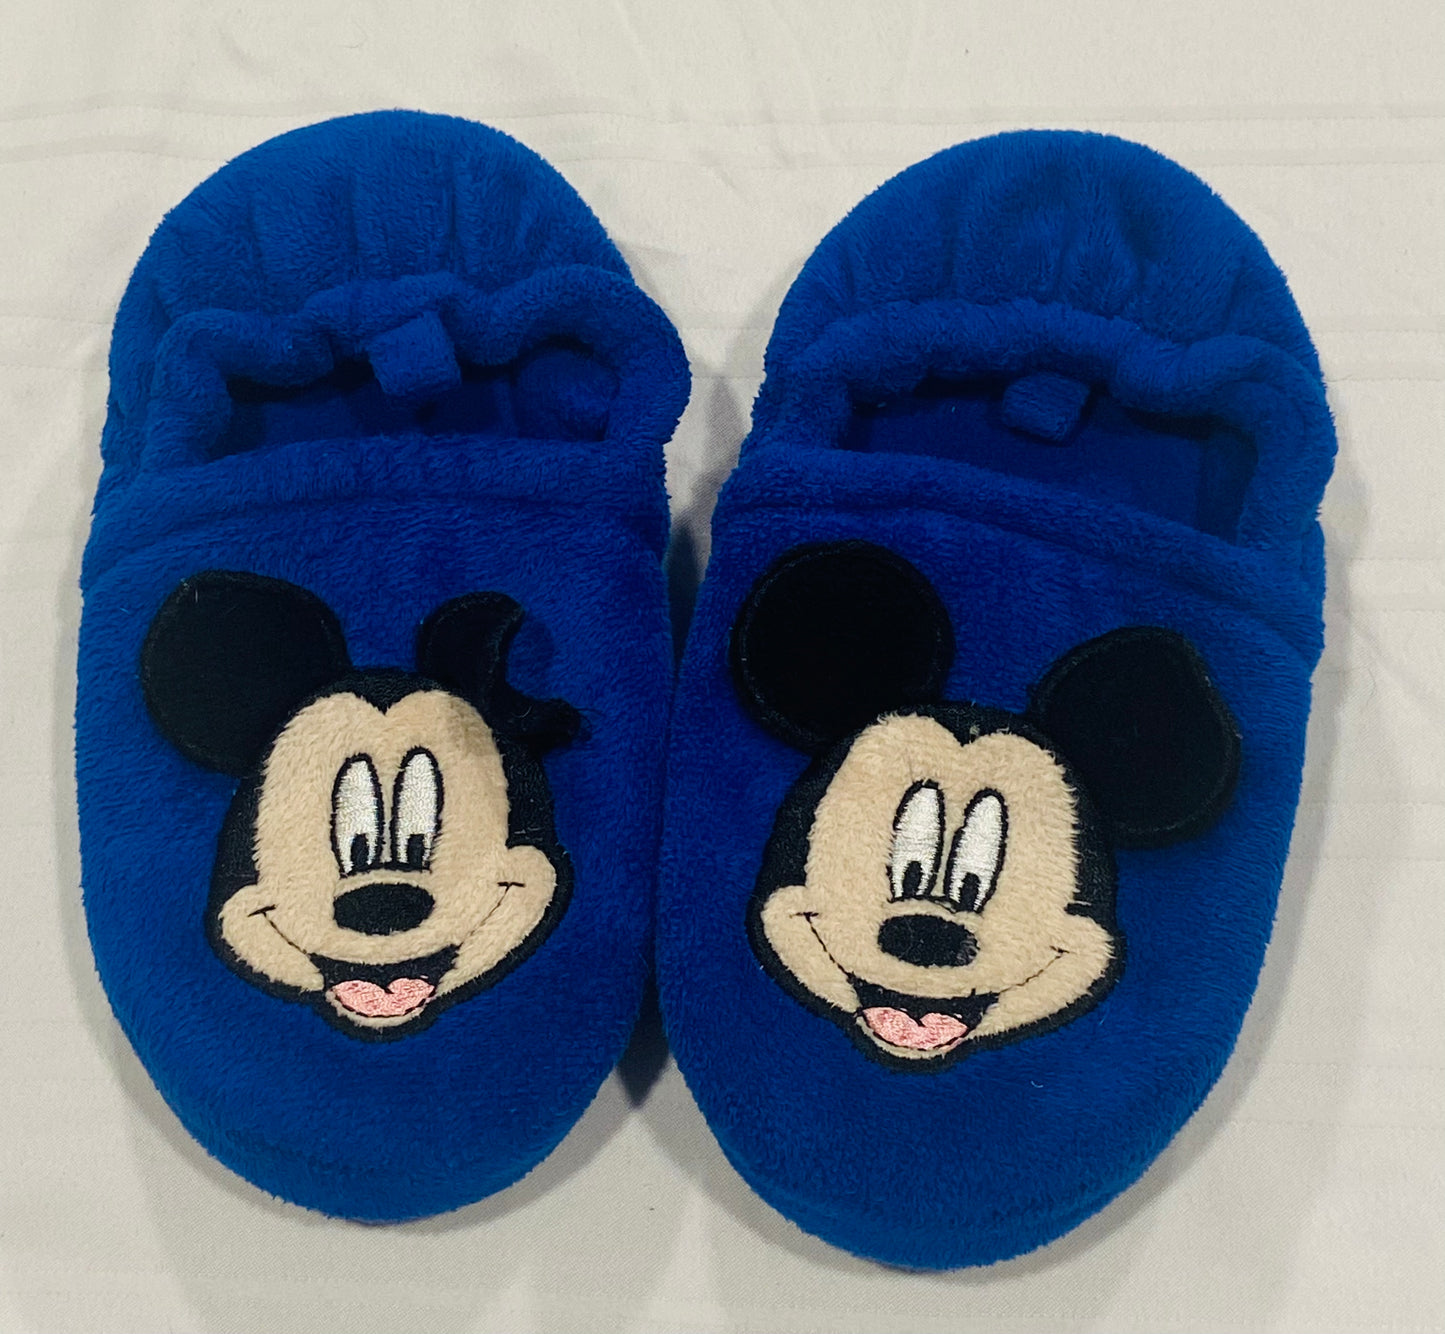 Mickey Slippers with Hard Soles - size 13/1 - EUC